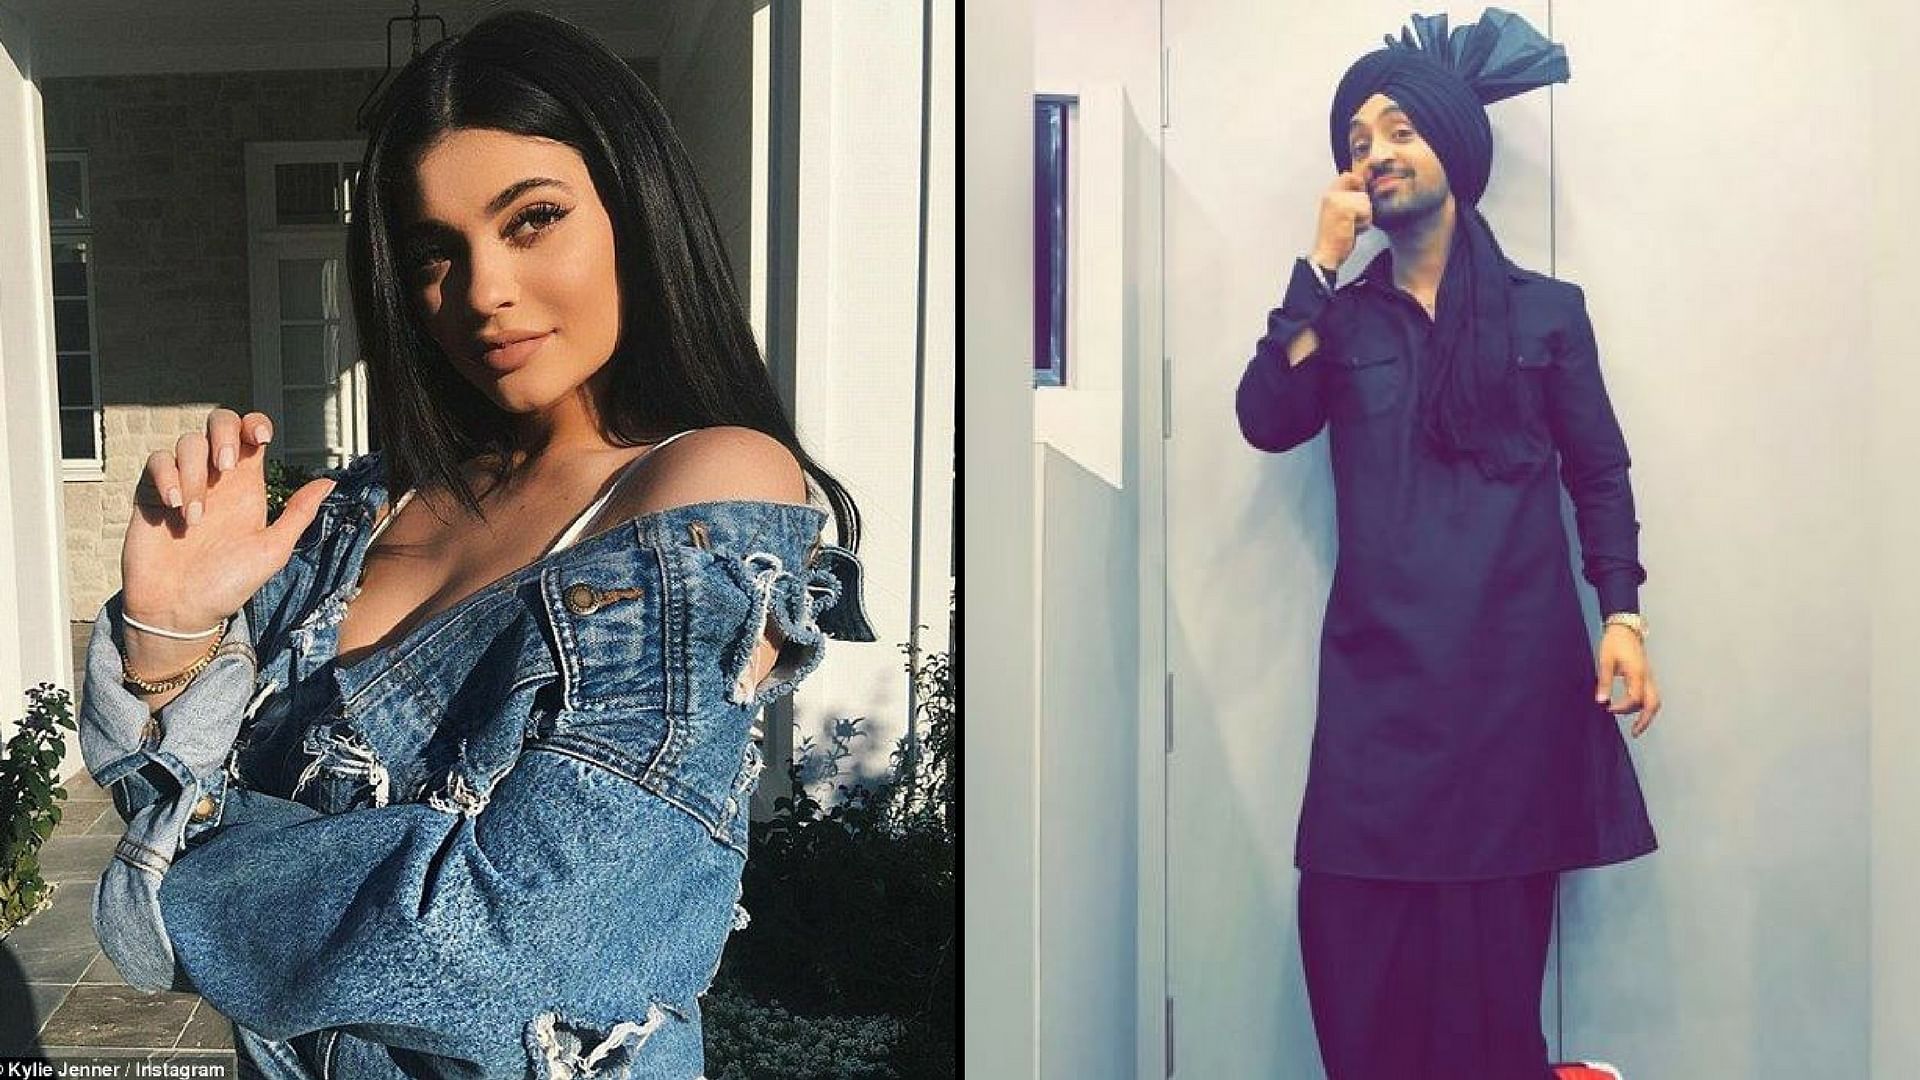 Kylie Jenner and Diljit Dosanjh. (Photo courtey: Instagram/altered by <b>The Quint</b>)